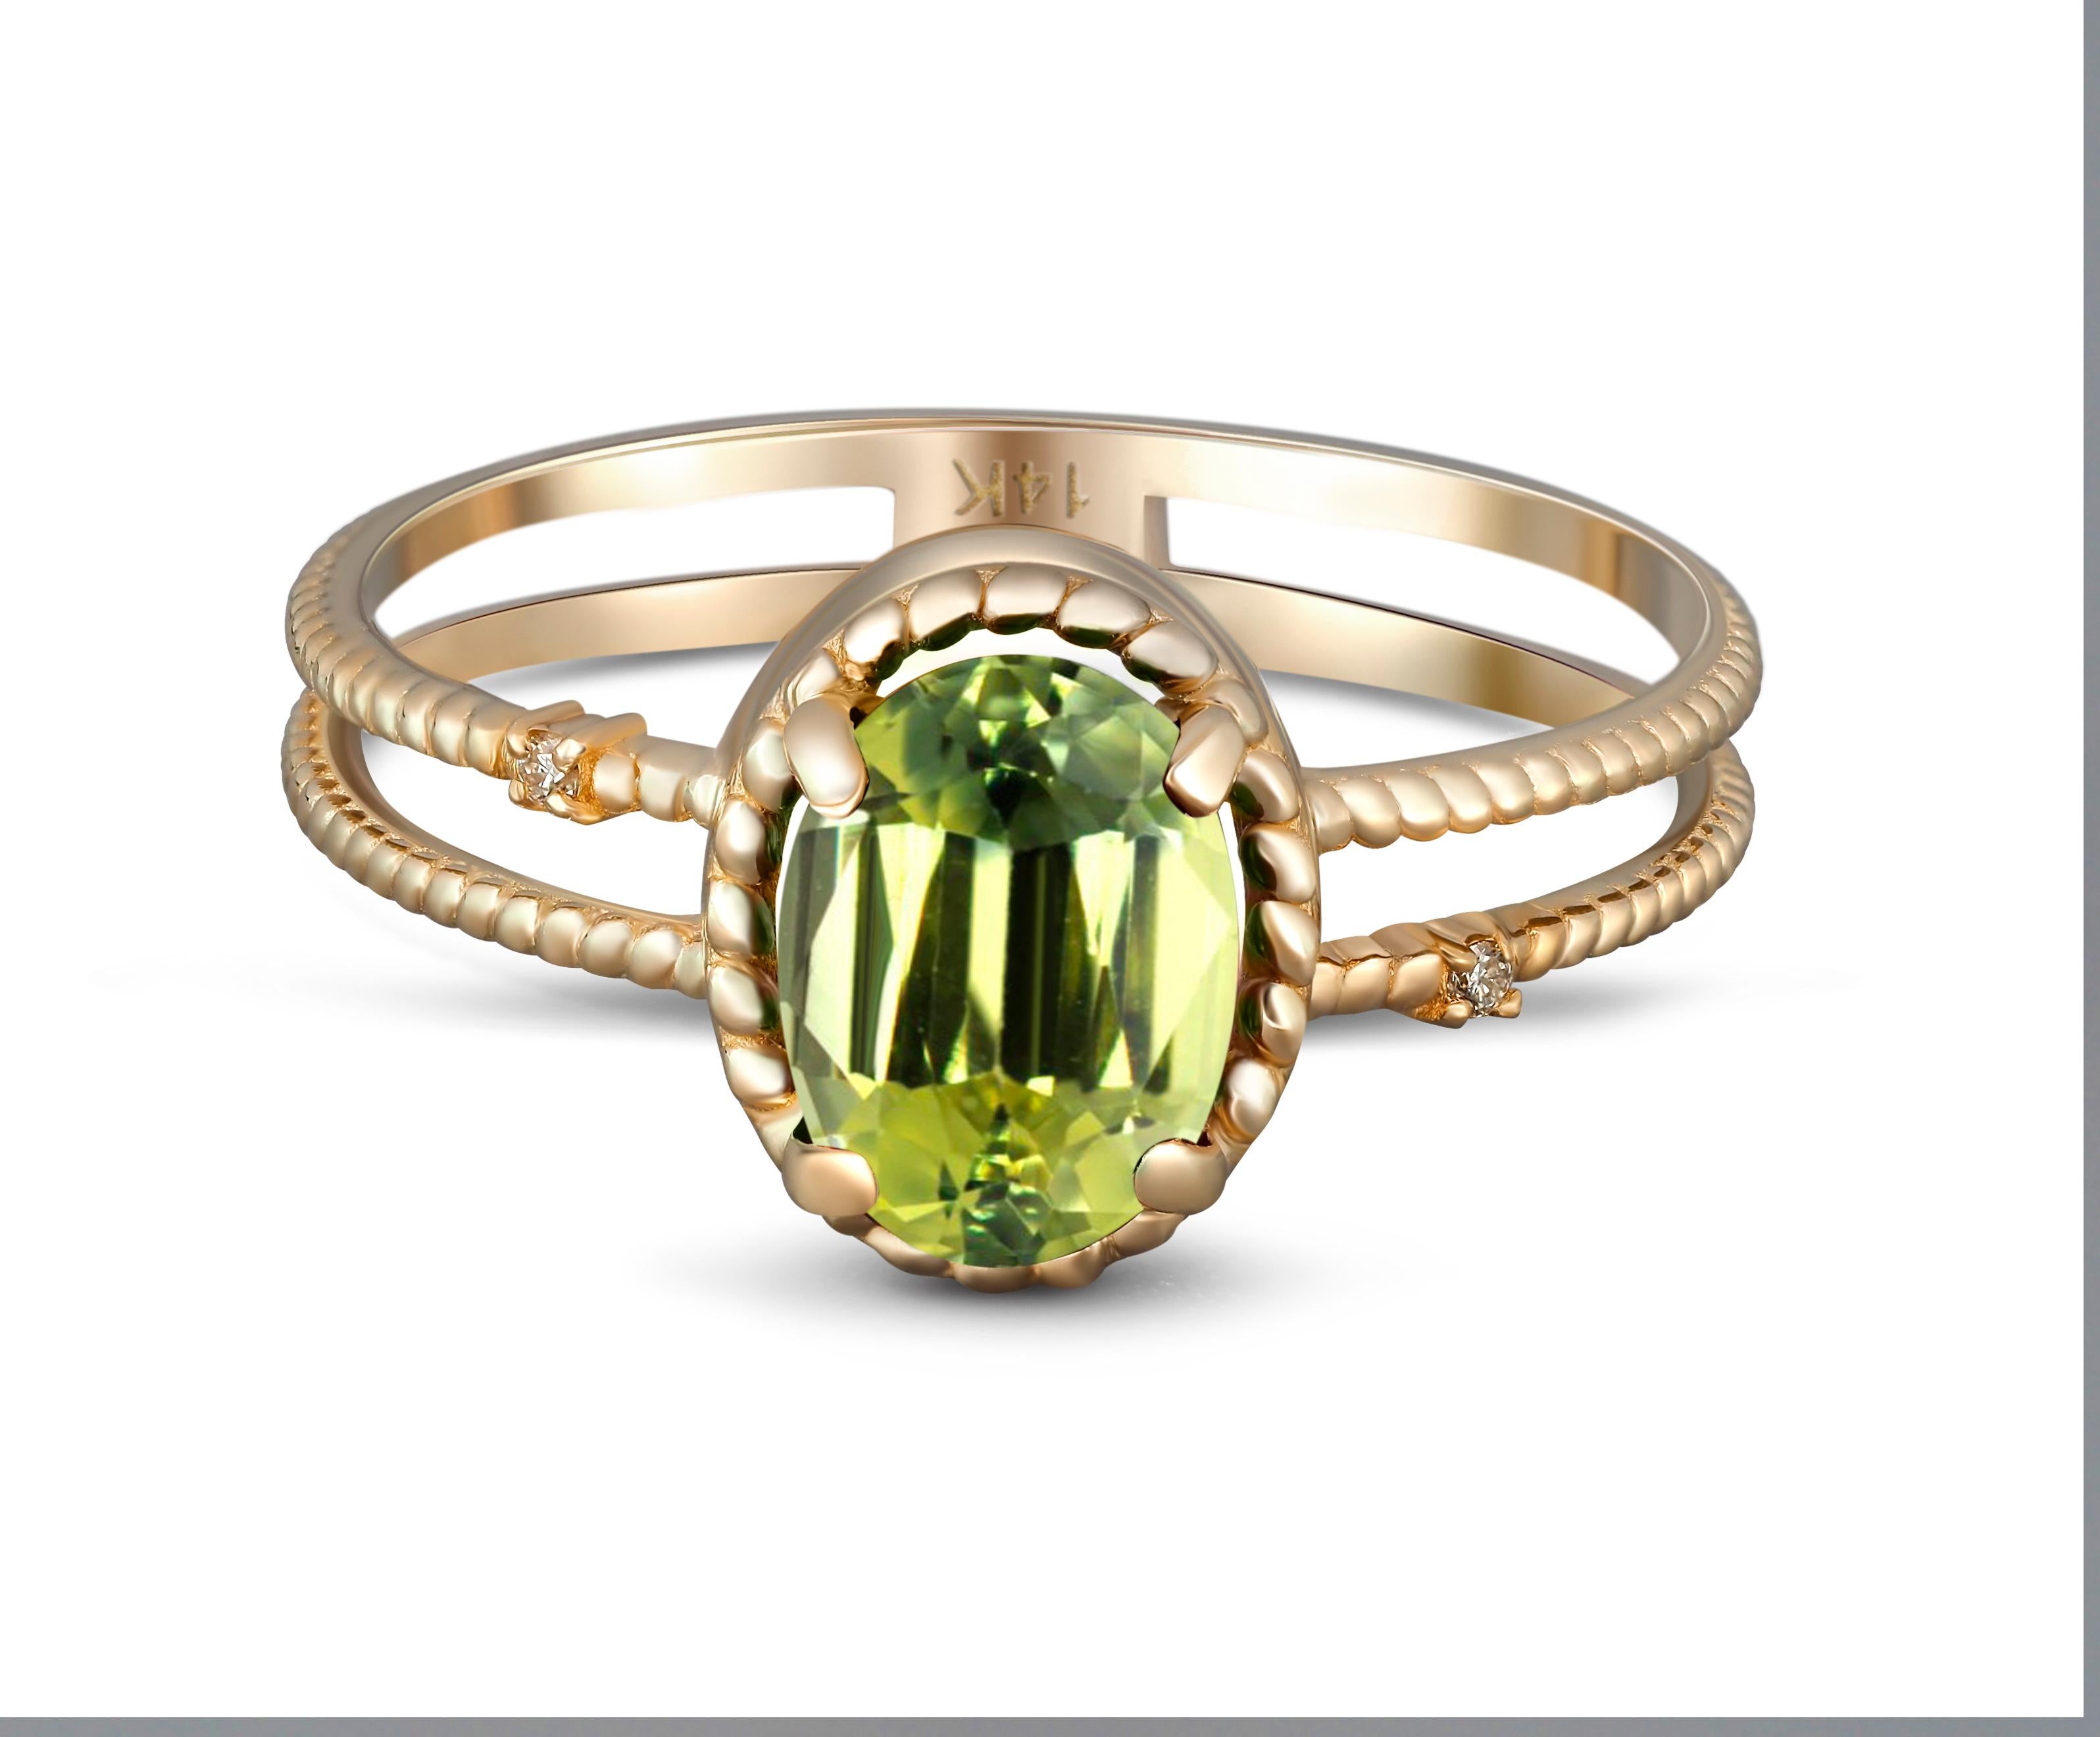 Oval Peridot ring. 
14k gold ring with Peridot. Minimalist Peridot ring. Peridot engagement ring. Peridot promise ring. Gift for her.

Metal: 14k gold
Weight: 1.8 g. depends from size.

Central stone: Natural Peridot
Weight -  approx 1 ct in total,